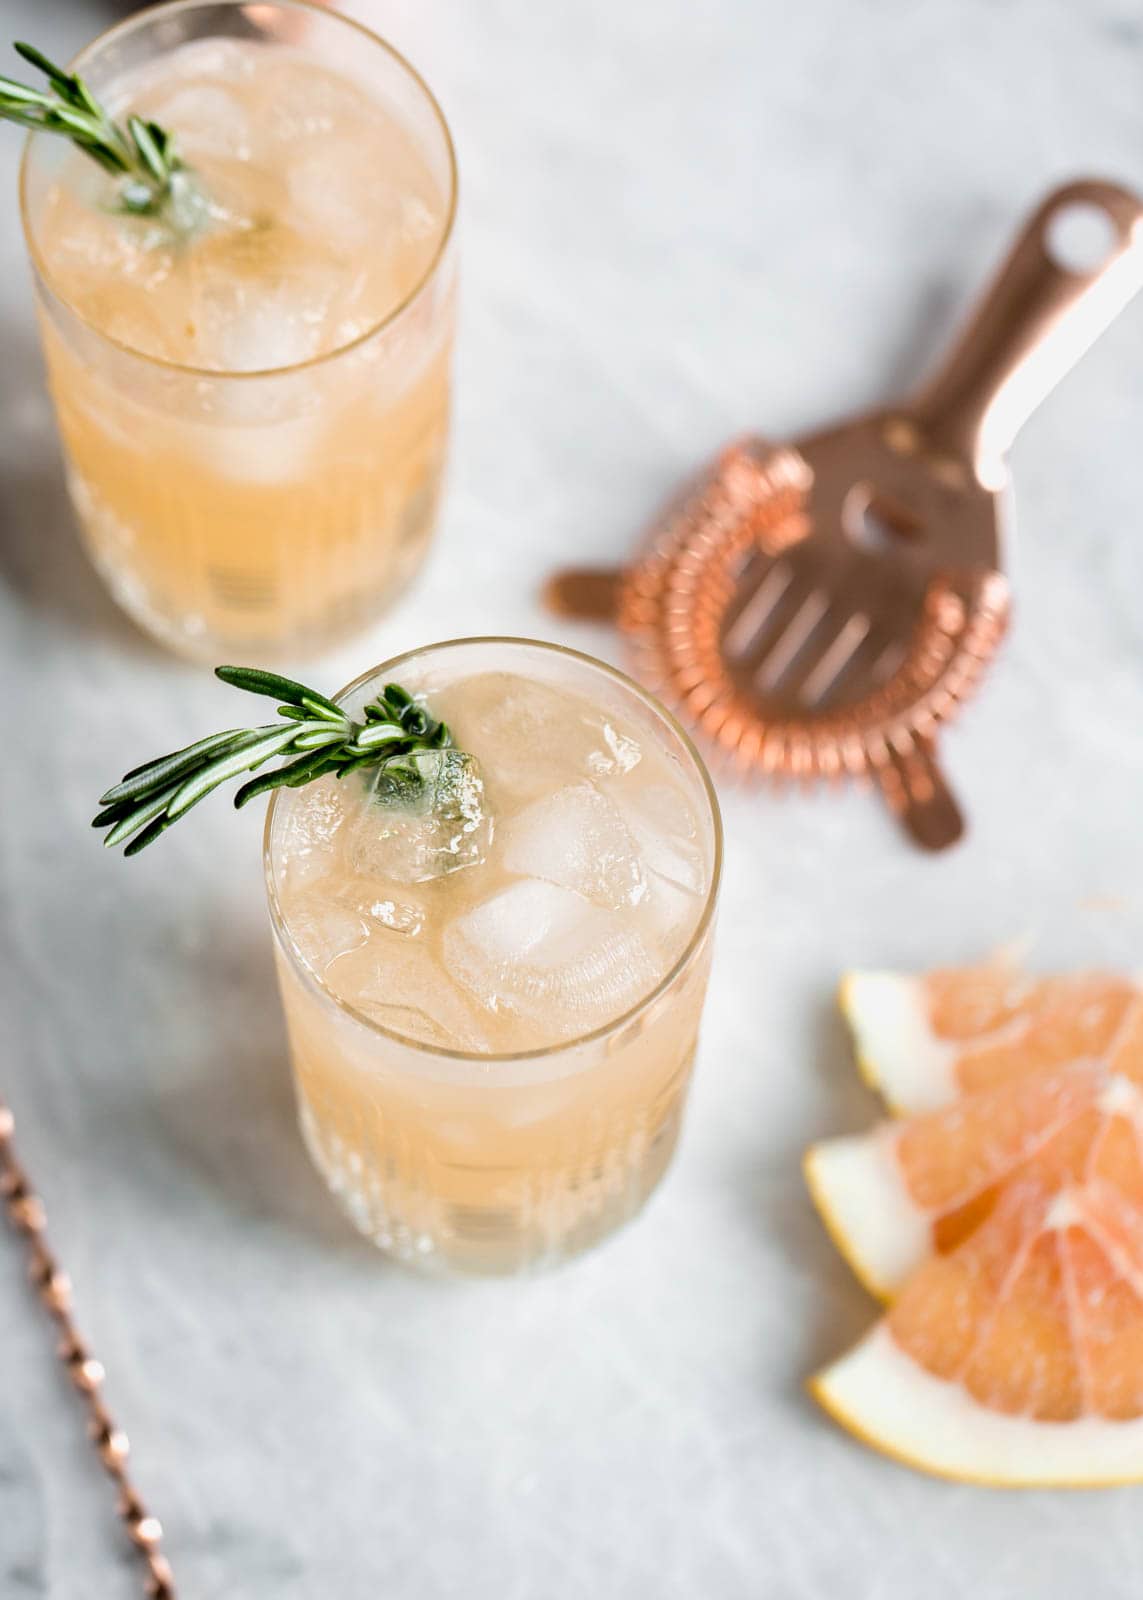 Named after the iconic dancer Ginger Rogers, this refreshing cocktail is made with fresh grapefruit juice, homemade ginger syrup, and gin!